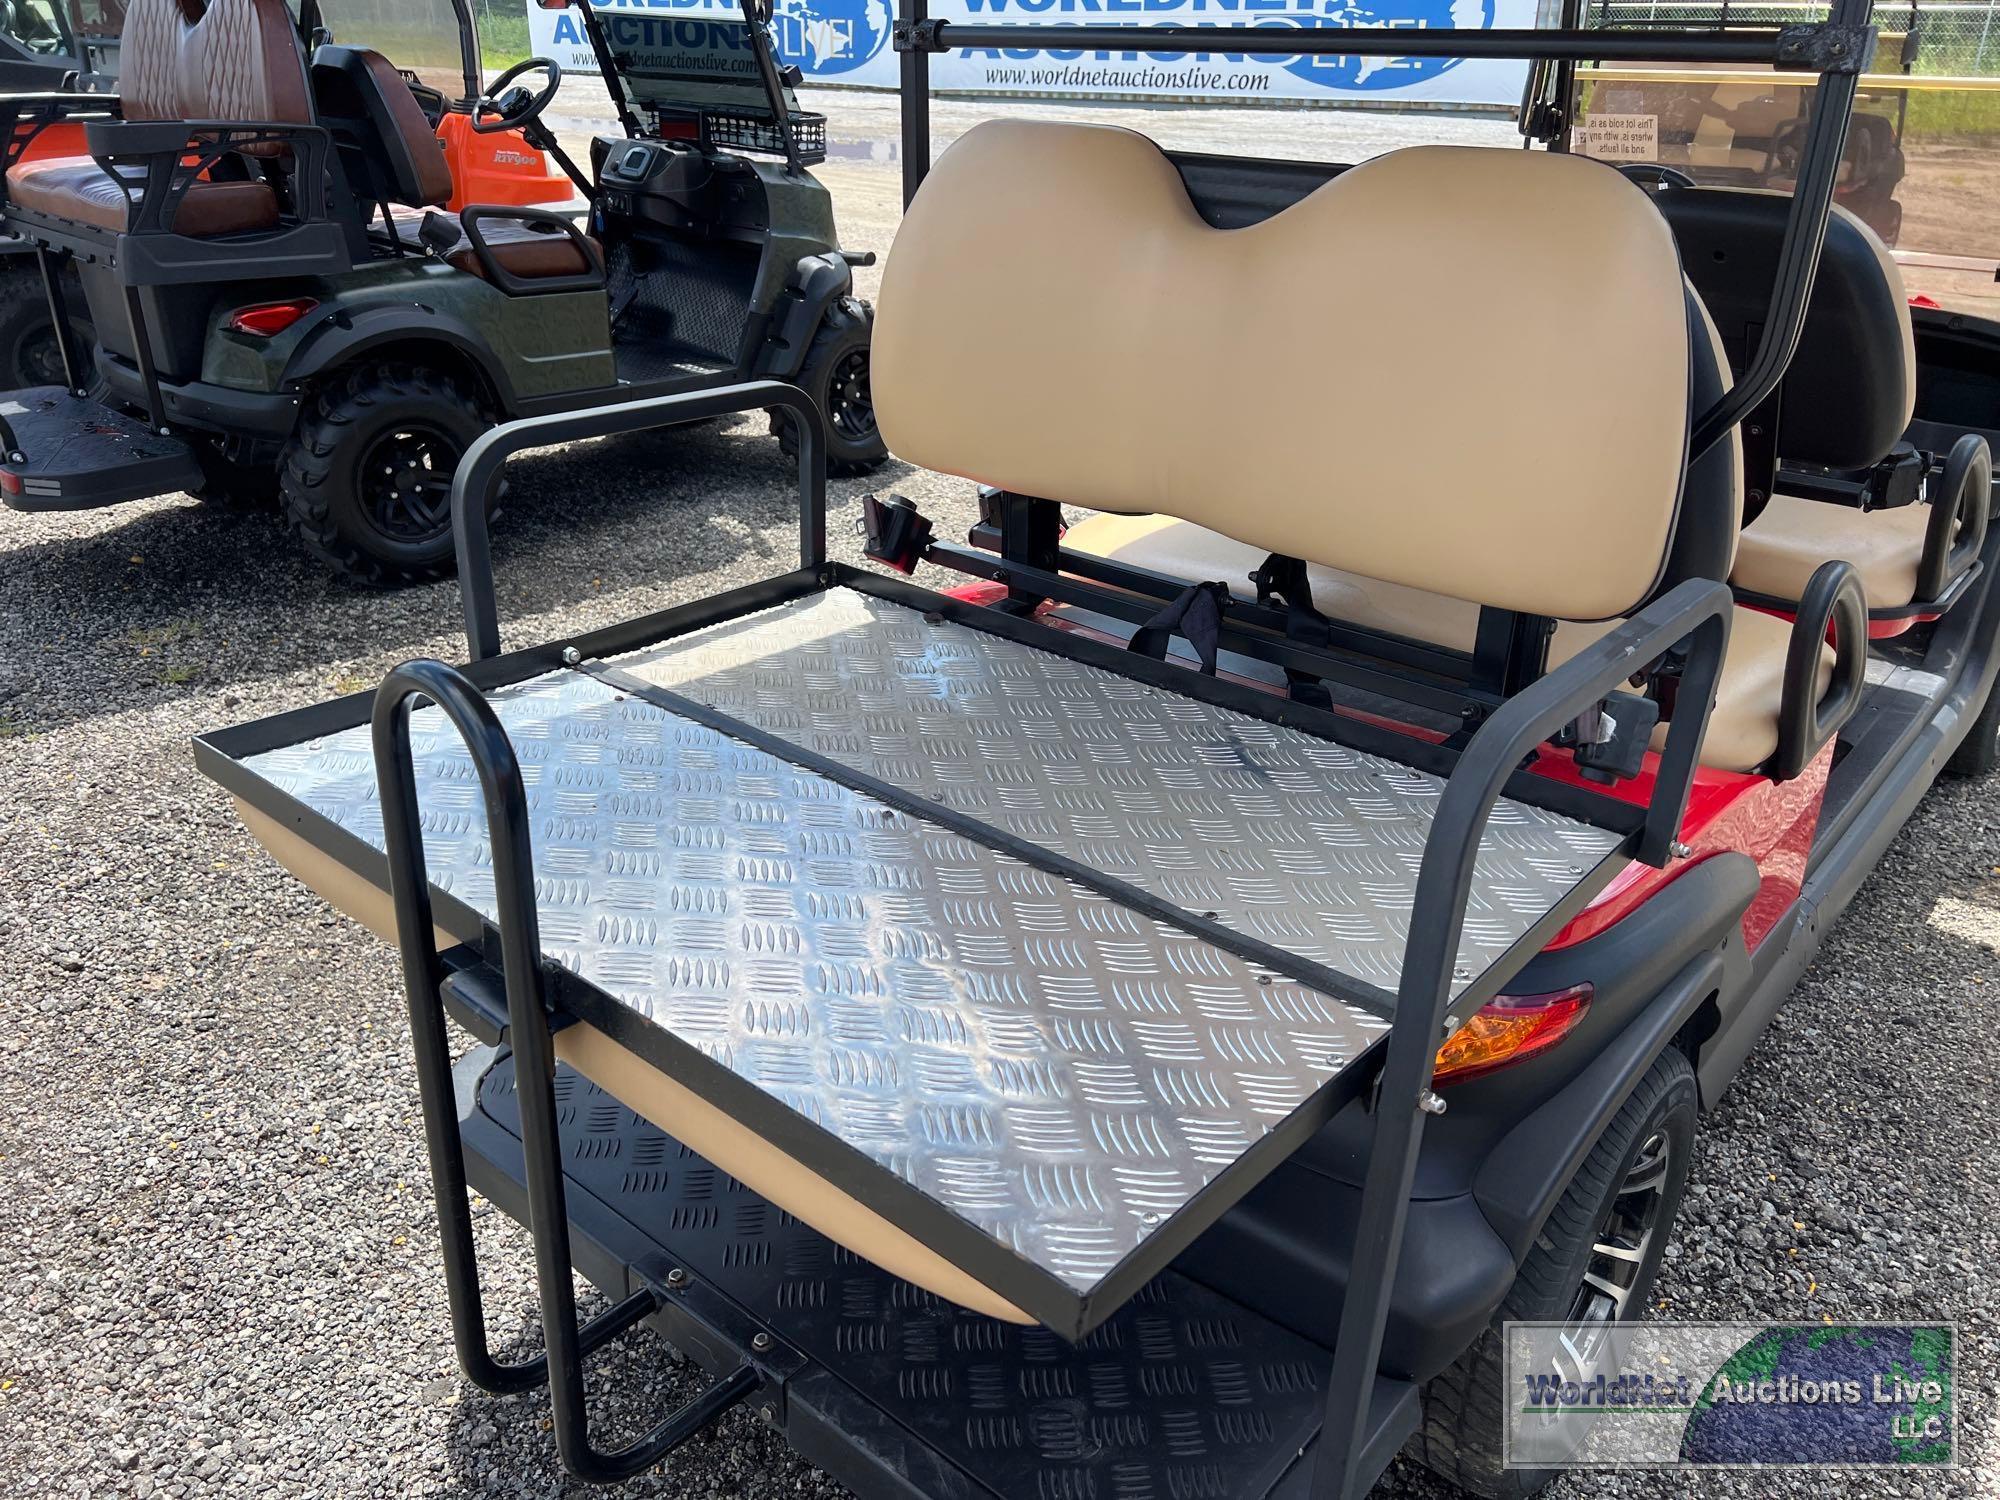 2020 SUZHOU EAGLE ELECTRIC GOLF CART VIN-L4F25A4AXL0080039 **NO TITLE, INVOICE ONLY**